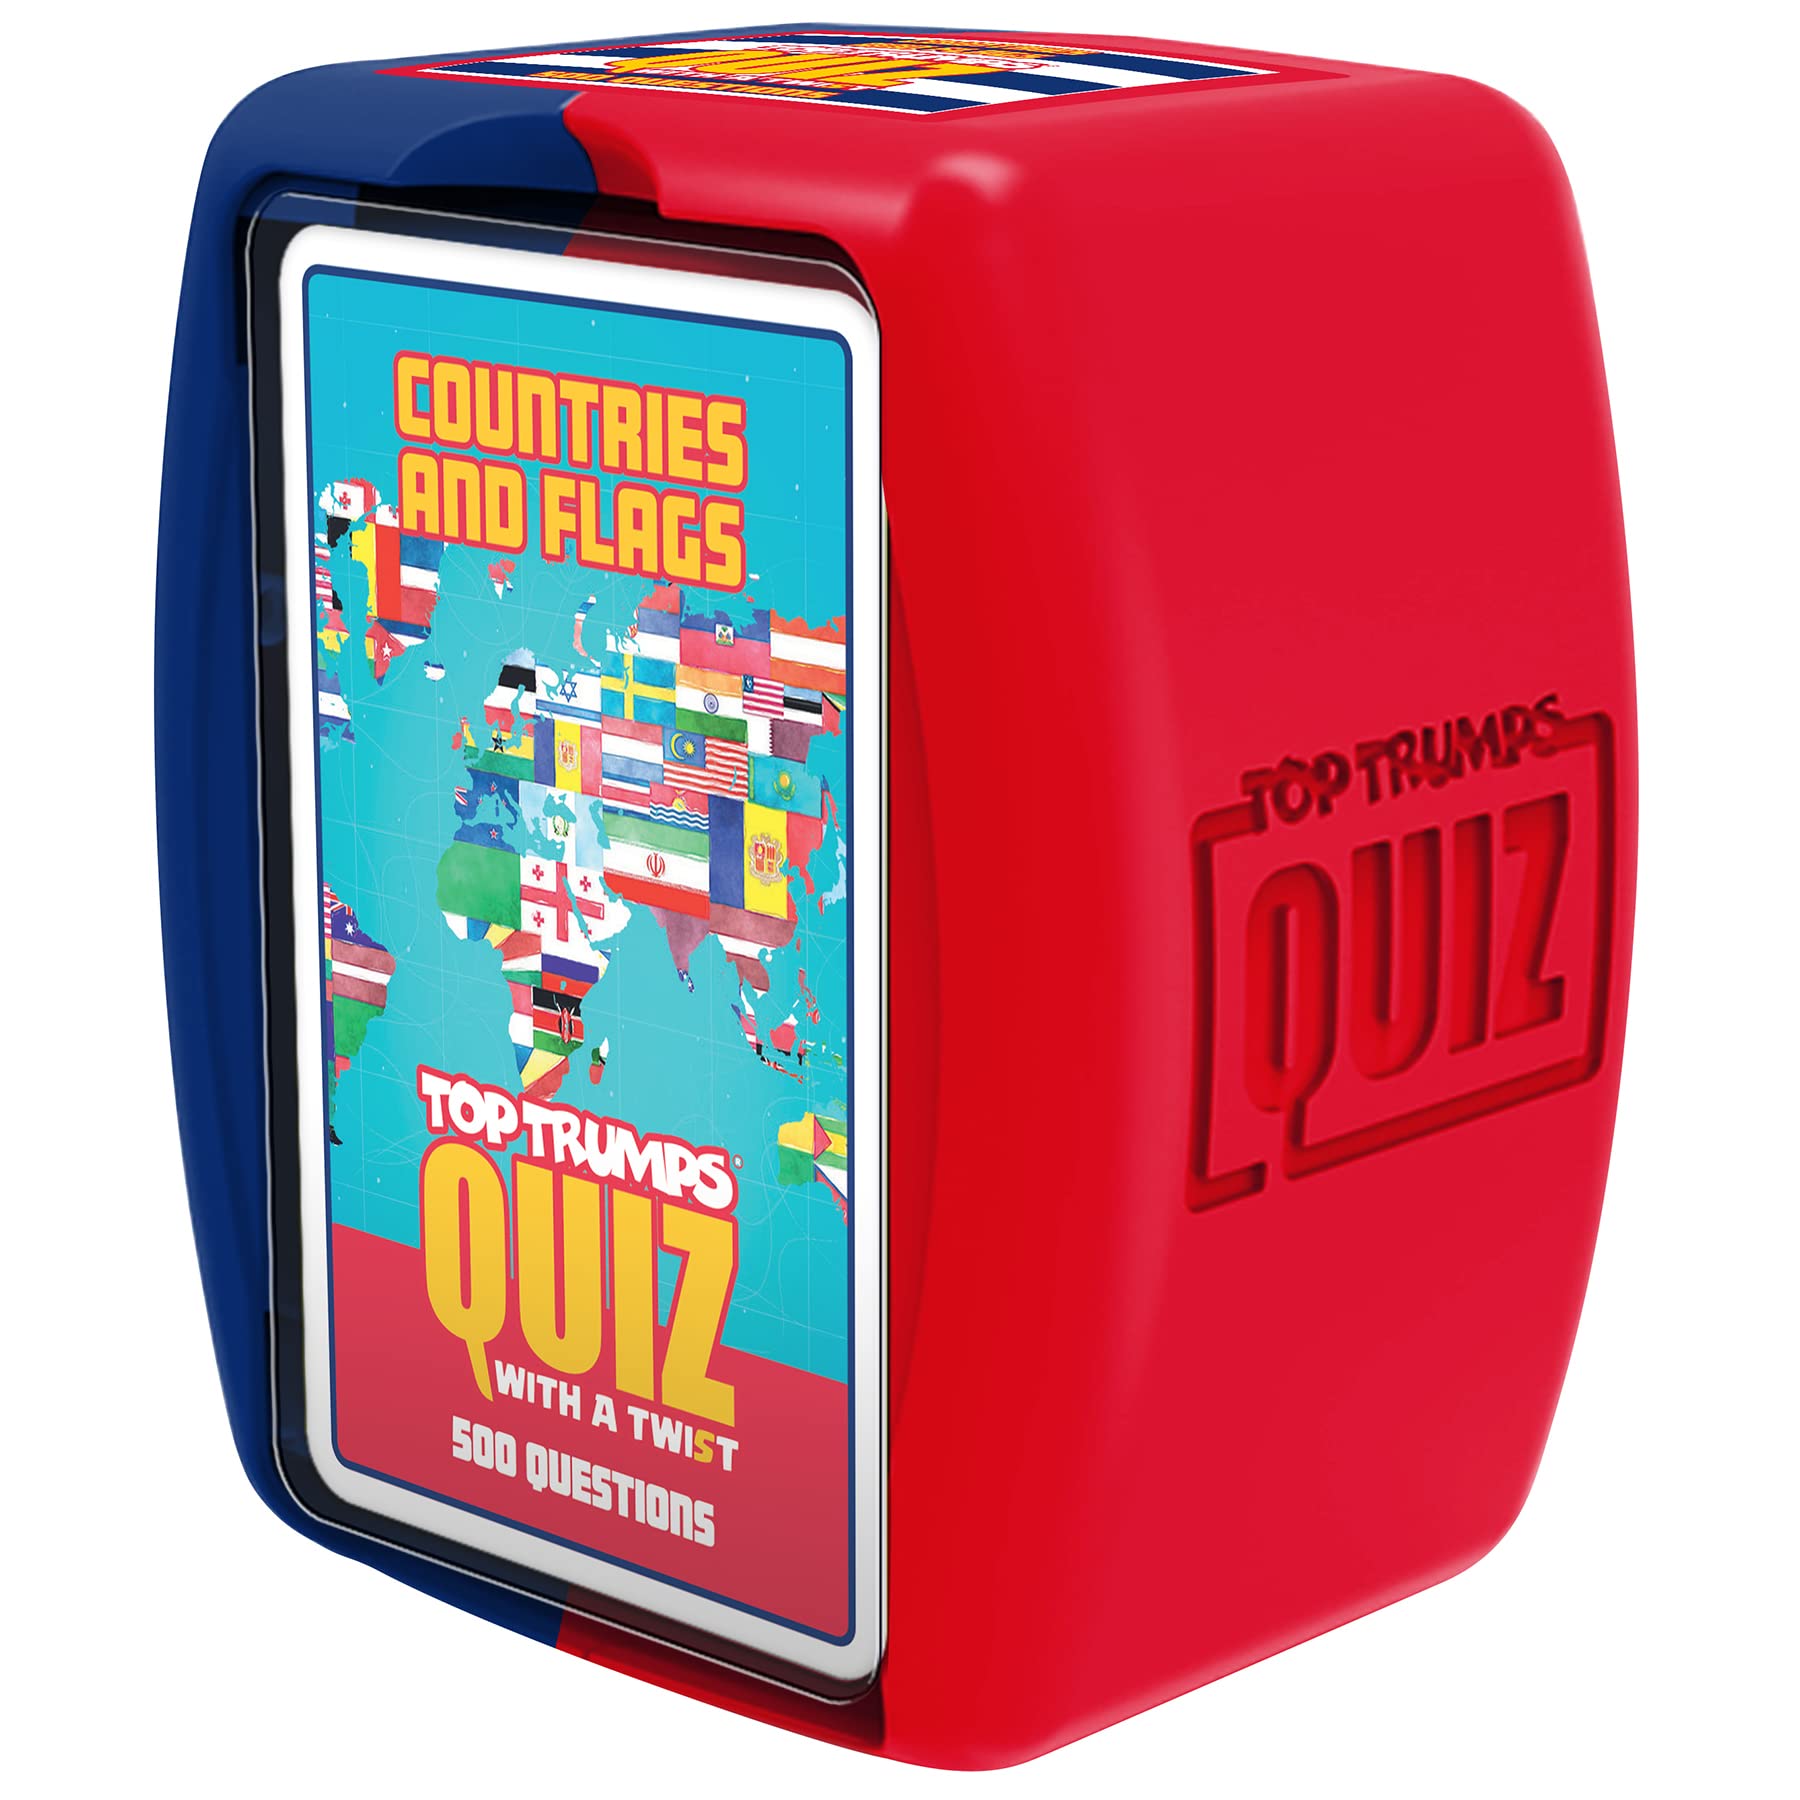 Top Trumps Countries and Flags Quiz Game